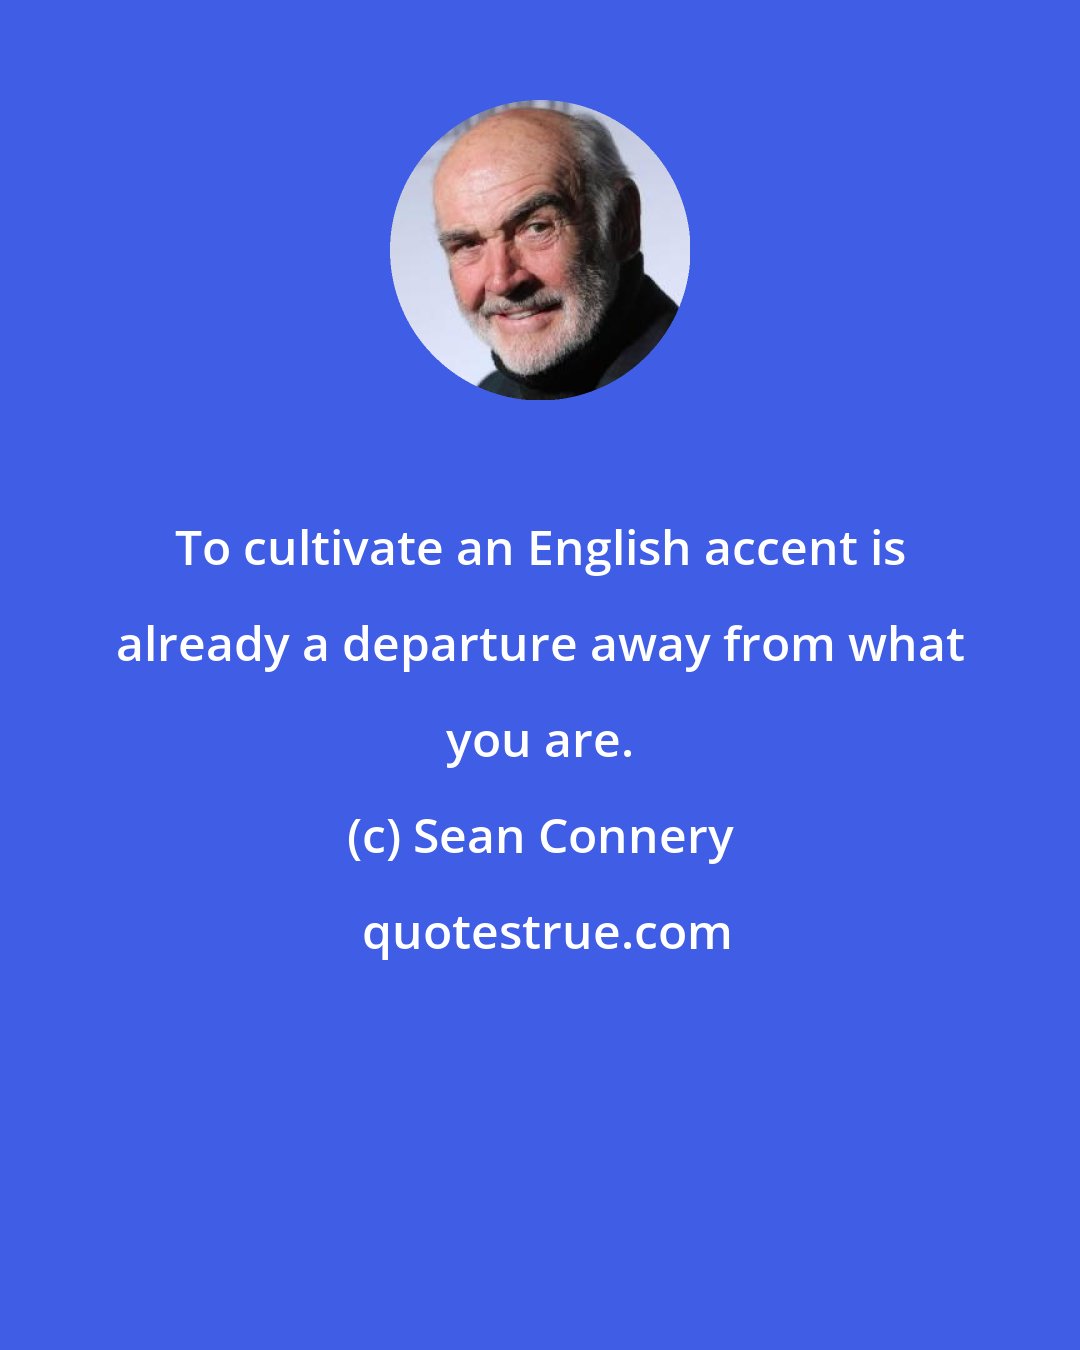 Sean Connery: To cultivate an English accent is already a departure away from what you are.